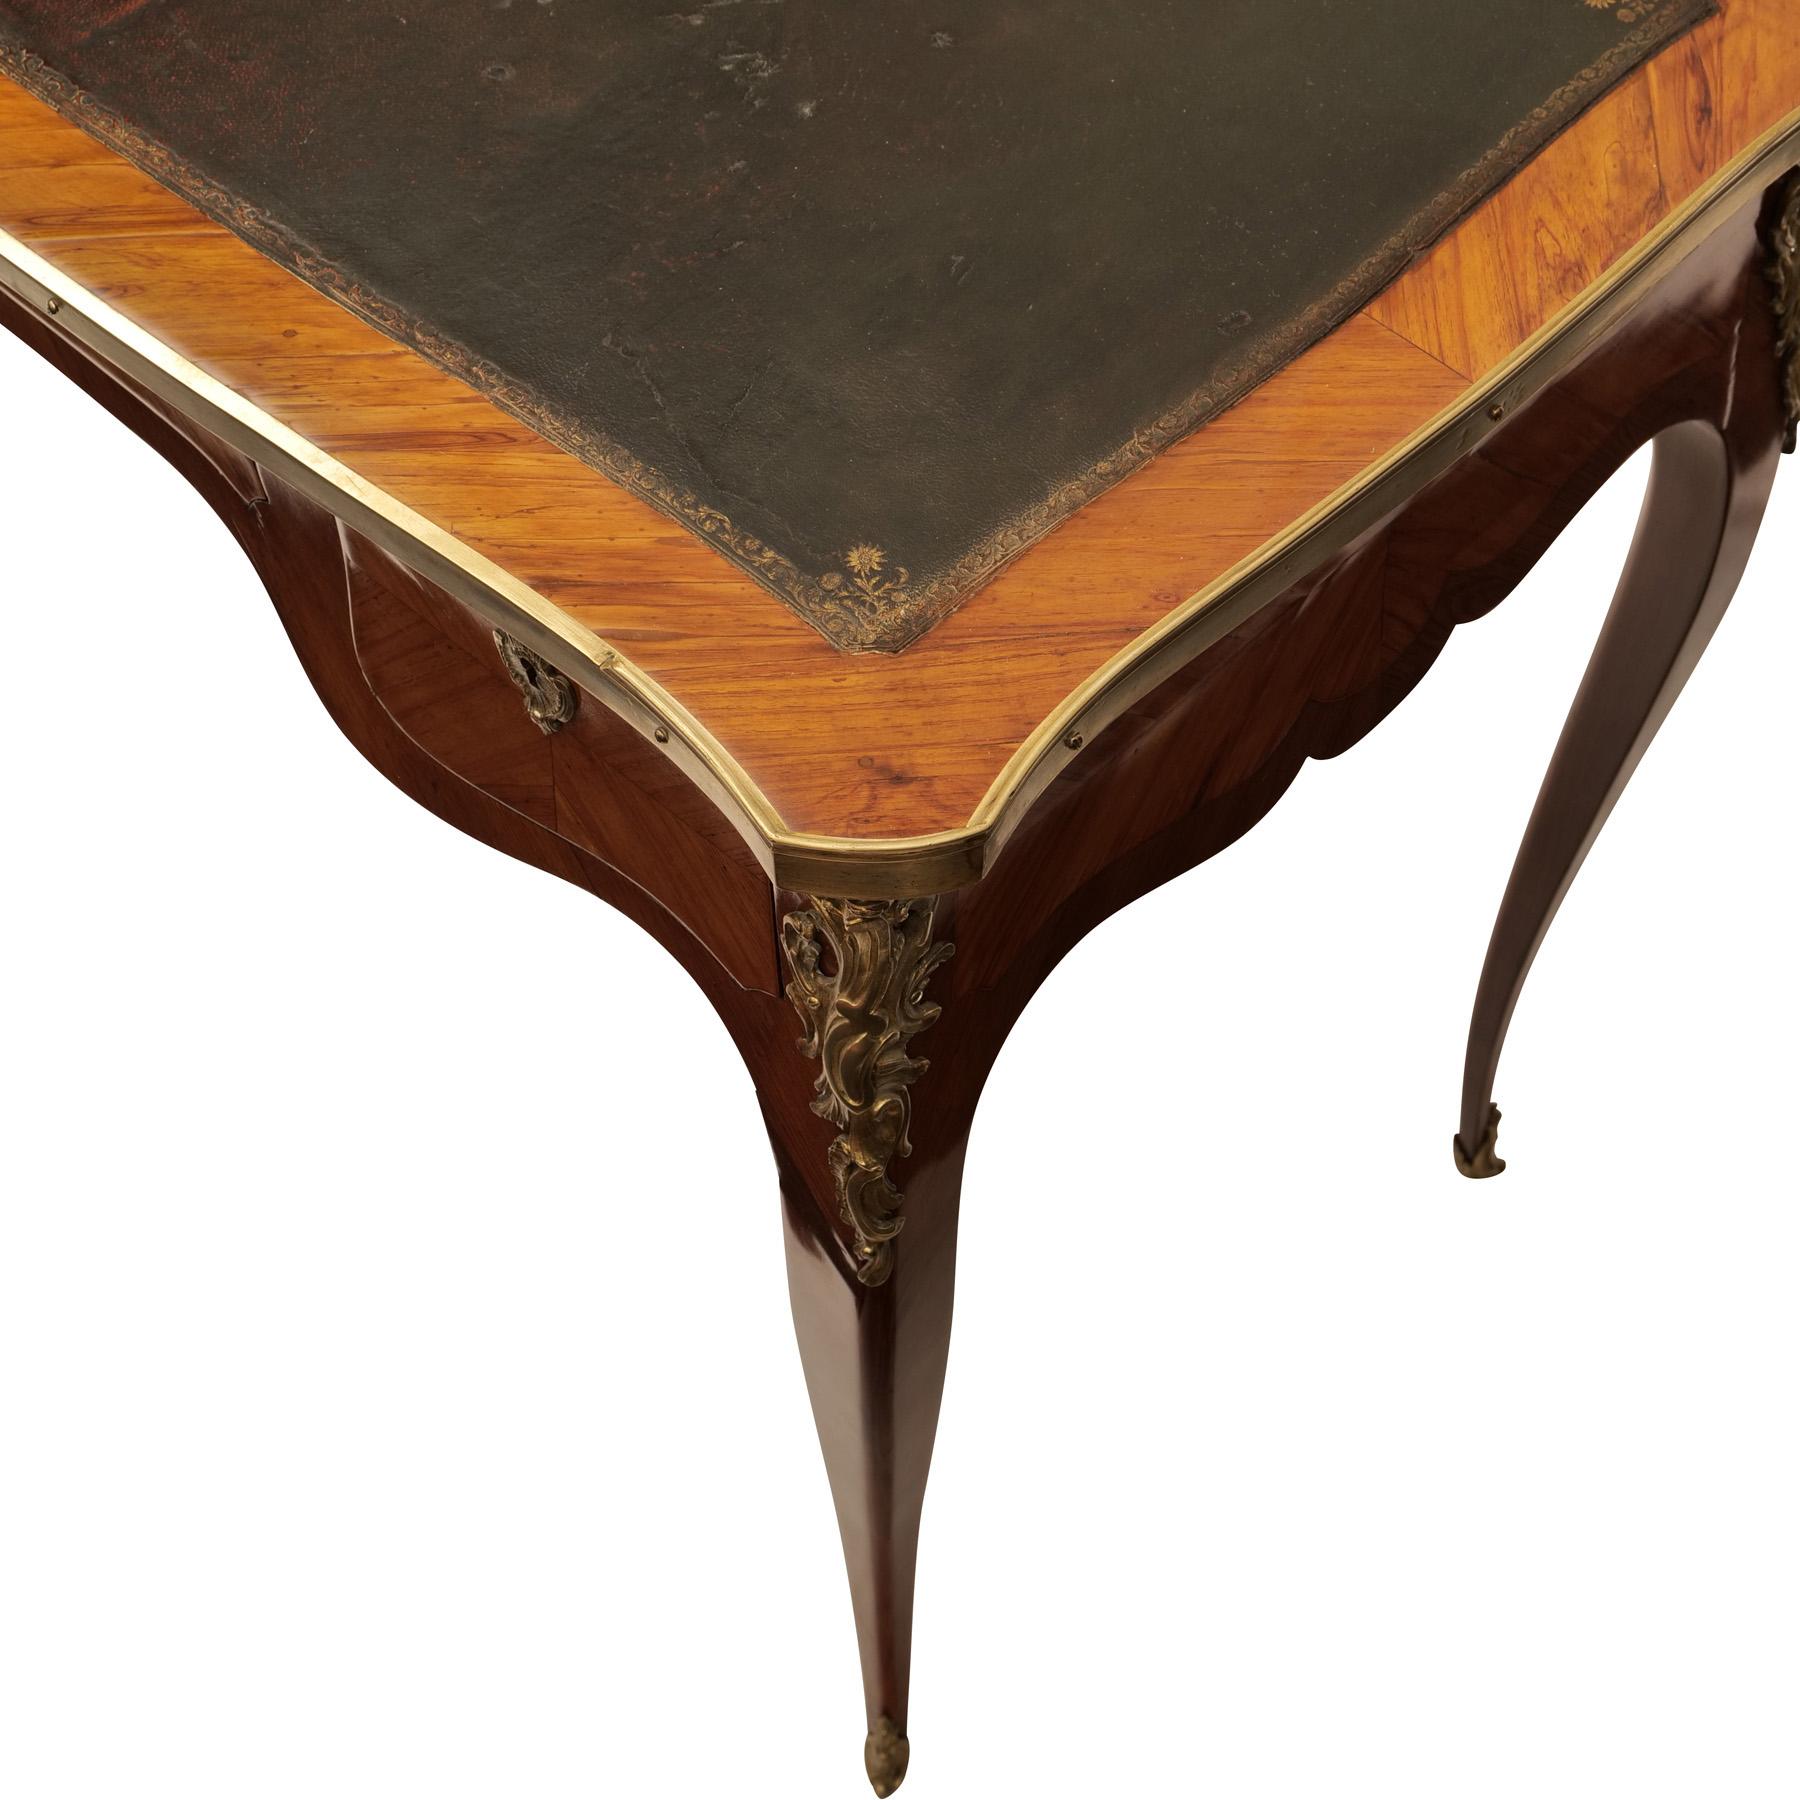 Ornamental lady's secretary, France around 1770, rosewood veneered, leather overlay, brass edging and metal appliques, 3 drawers, shellac-wax polish

height: 75 cm, width: 94,5 cm, depth: 55 cm